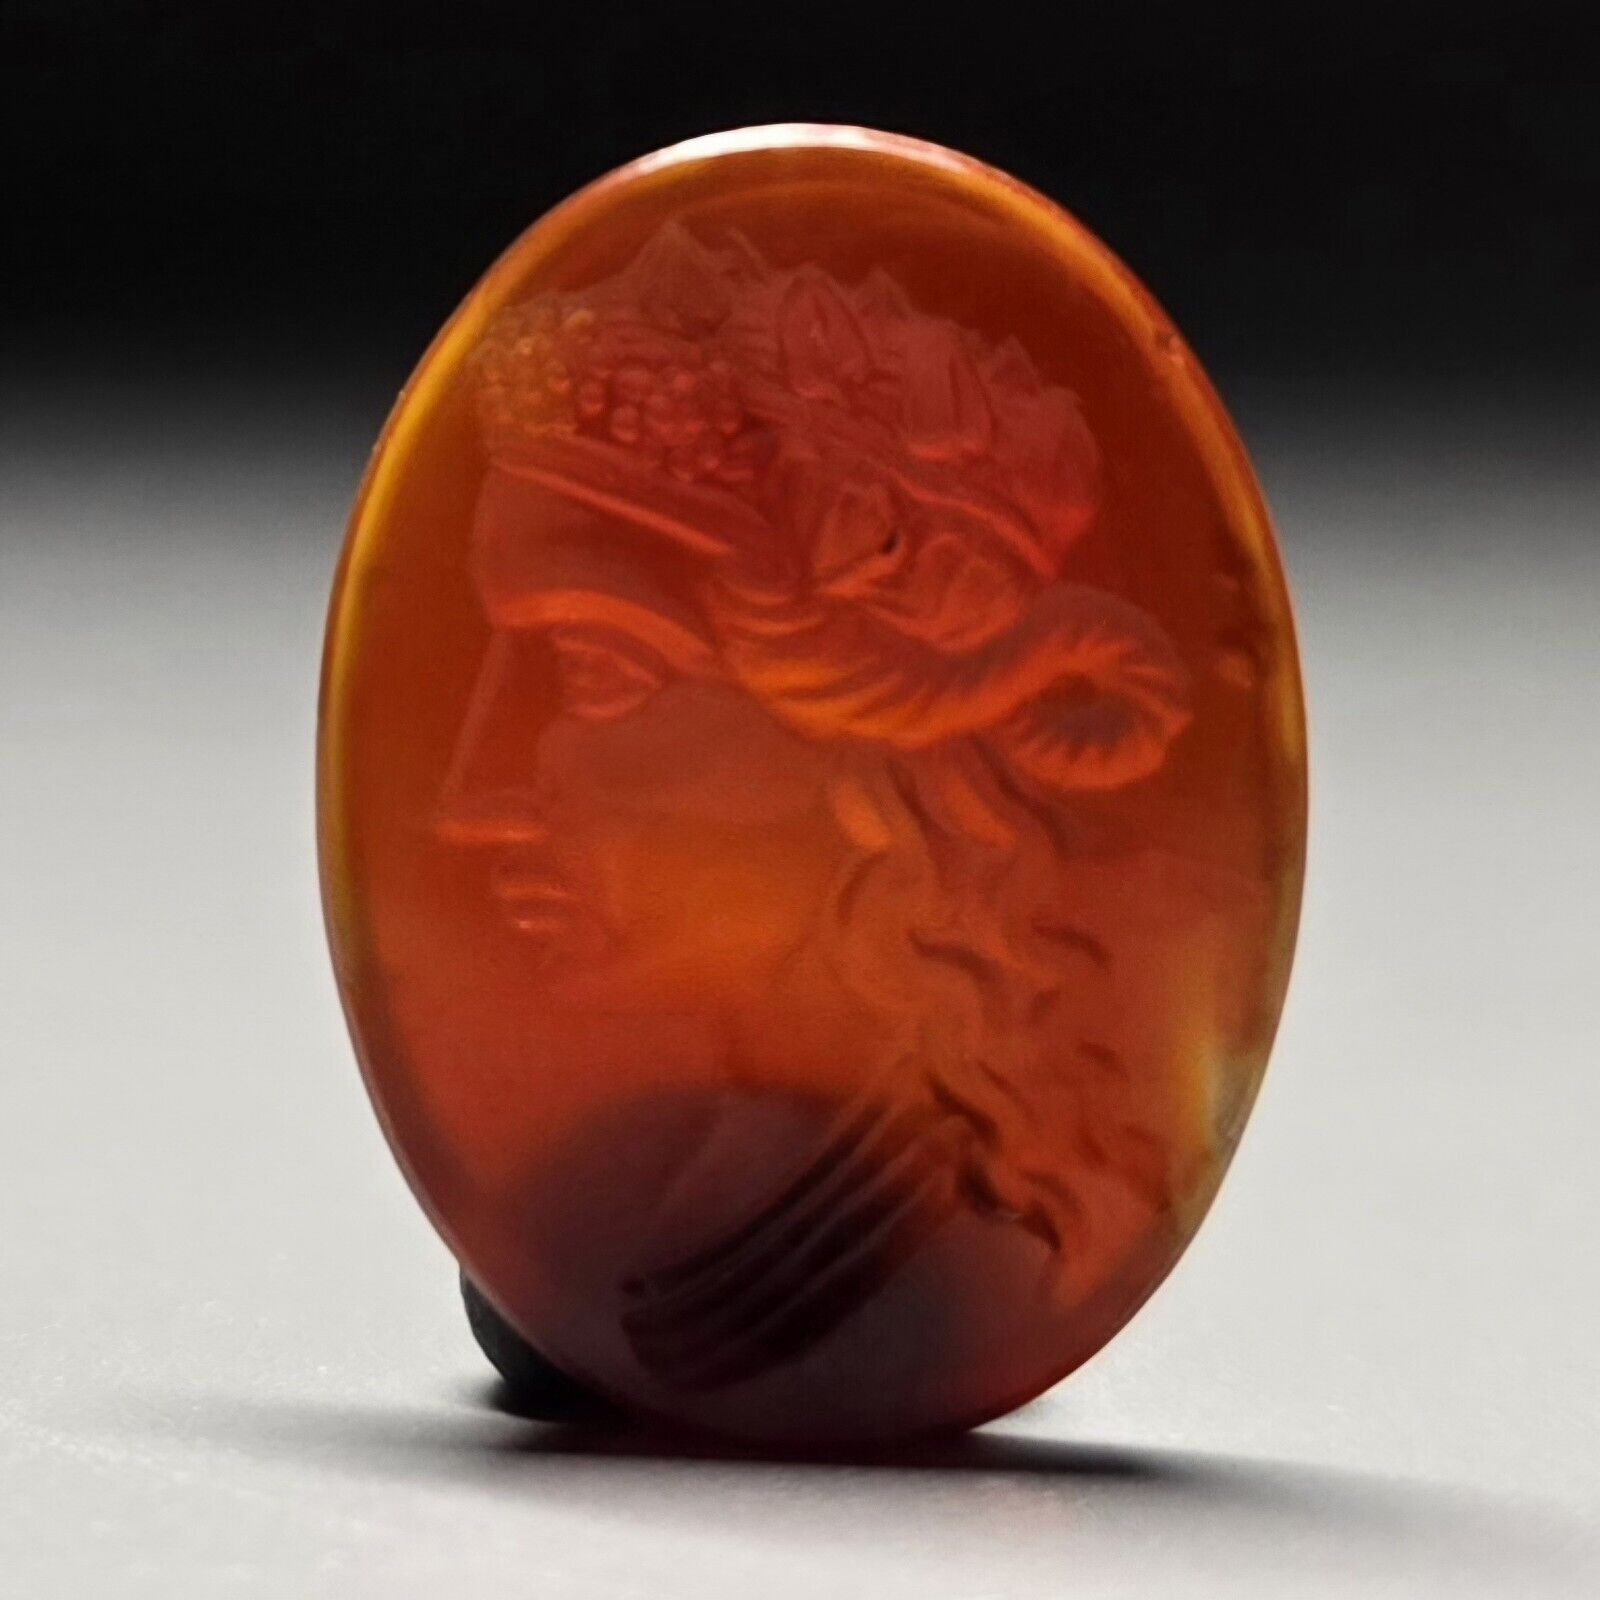 VERY BEAUTIFUL AND IMPORTANT ROMAN ENGRAVED GEM INTAGLIO DEPICTING A QUEEN